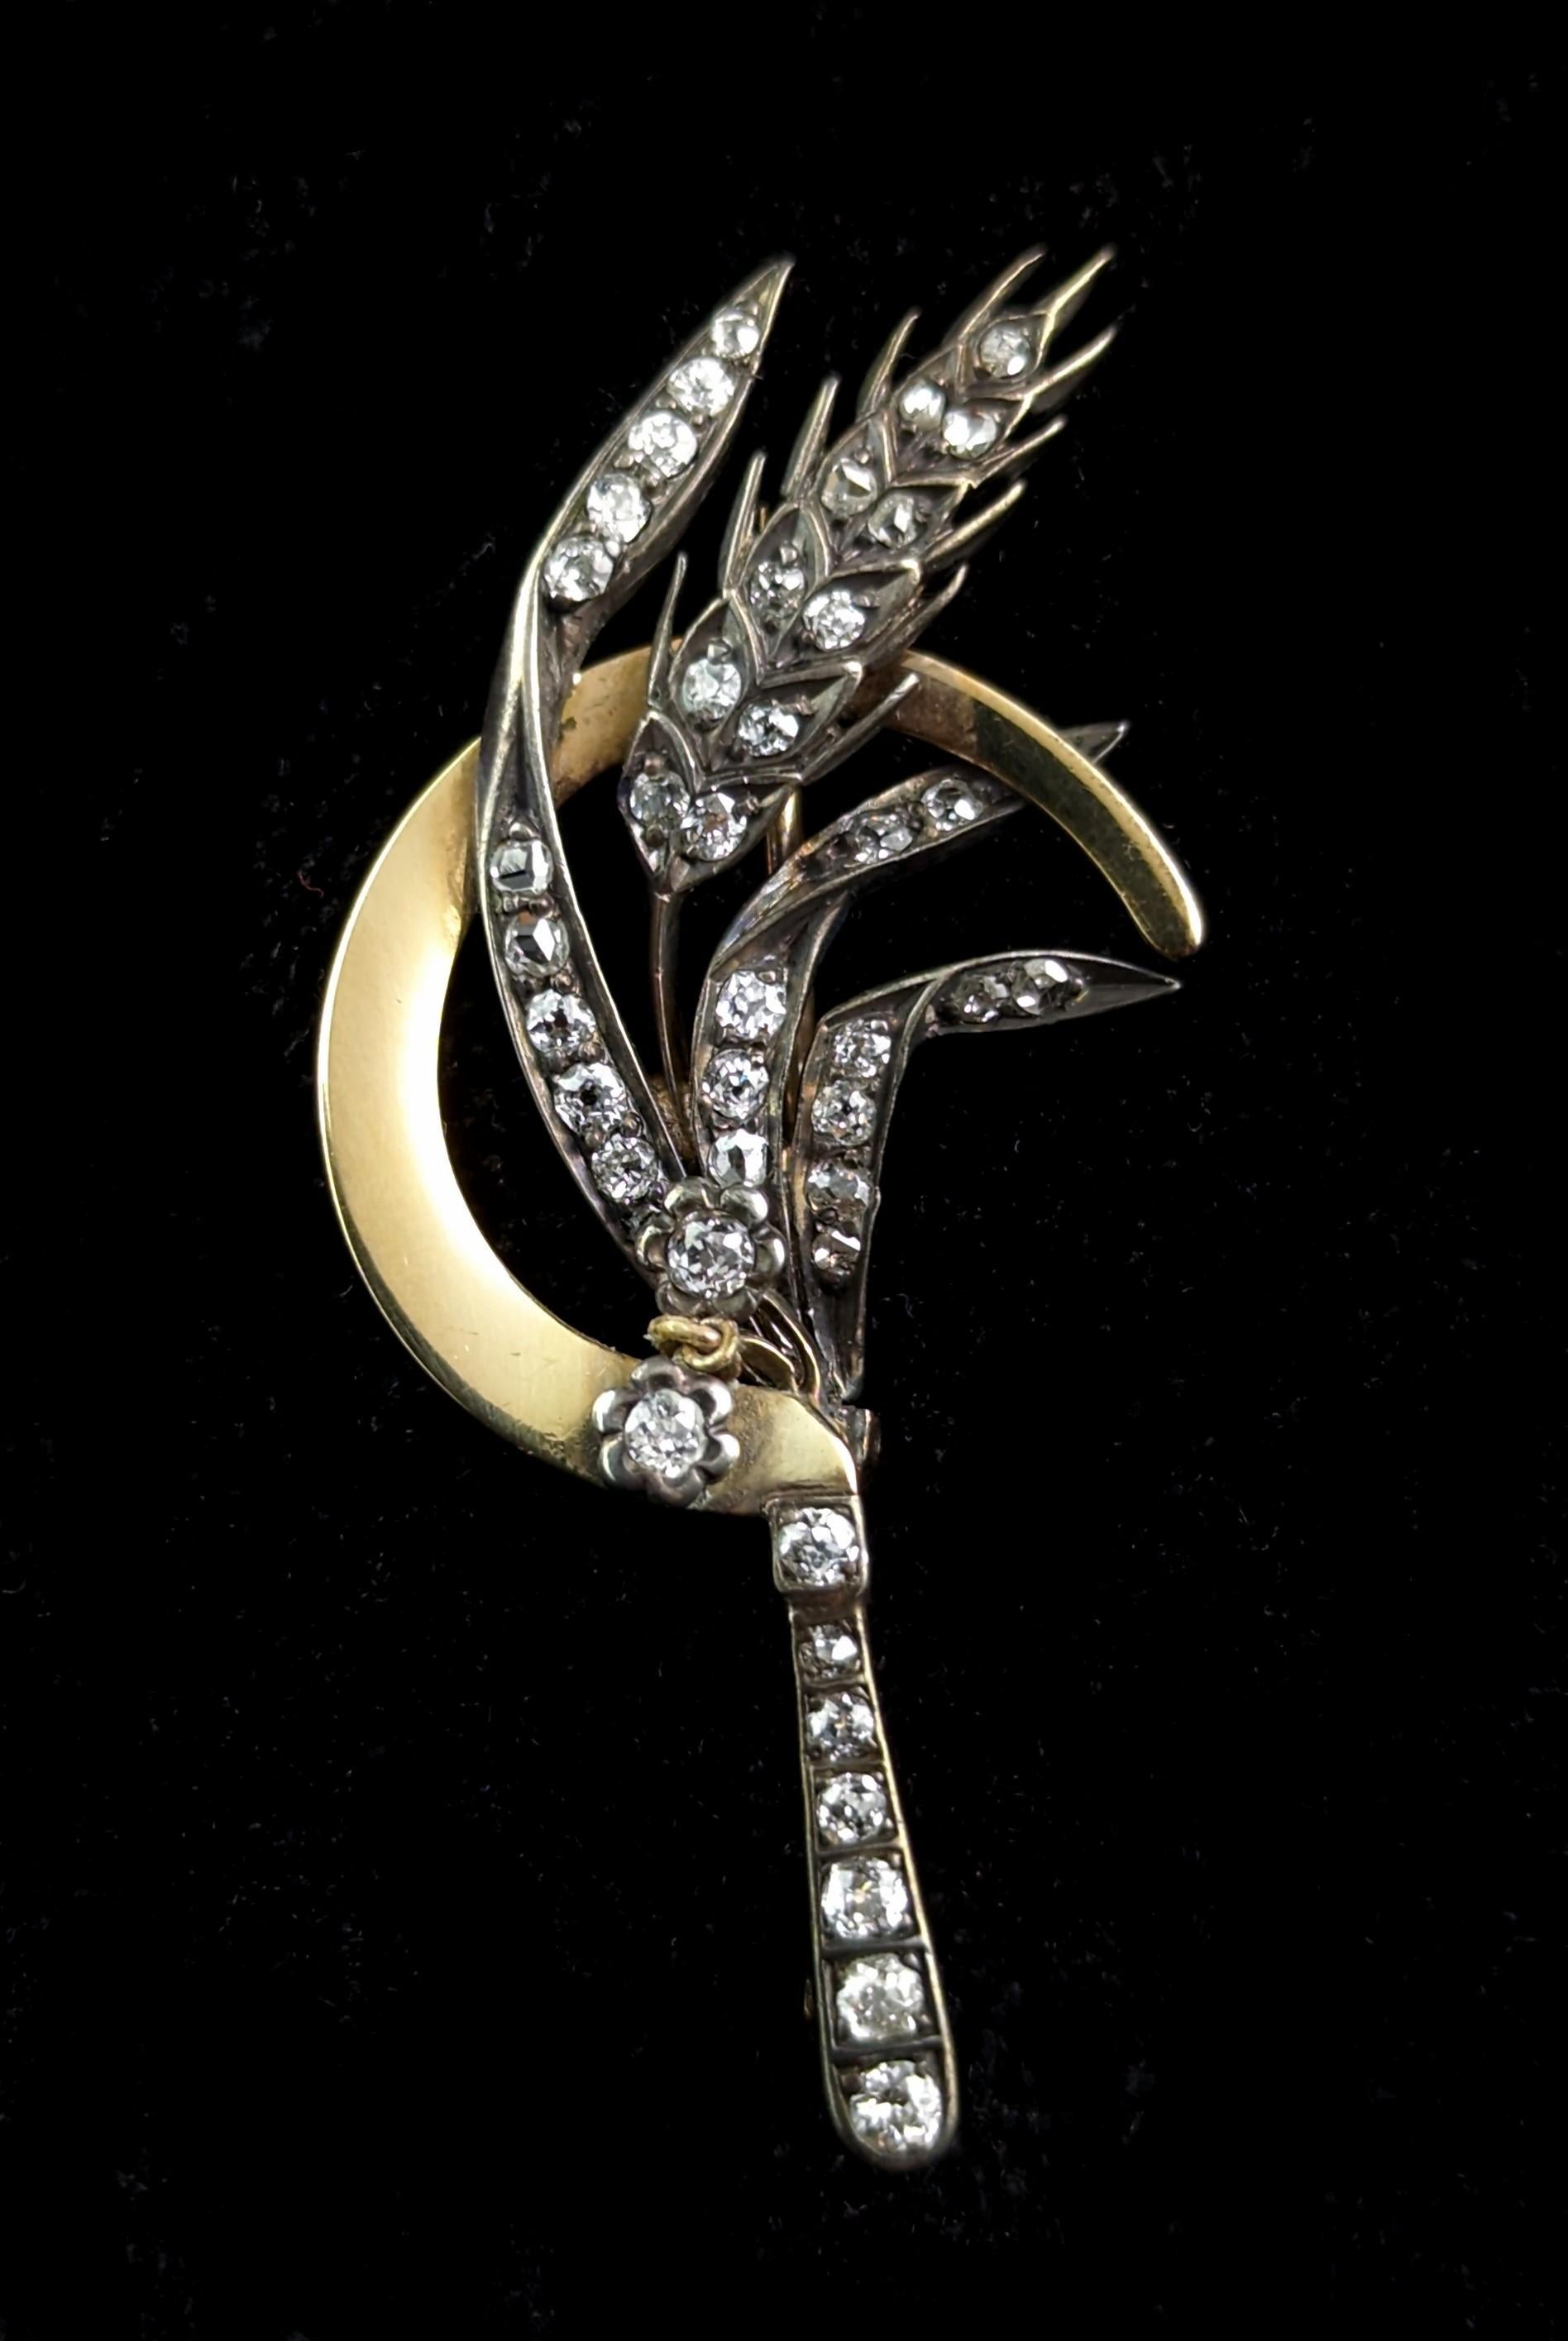 Steeped in symbolism and beauty this antique diamond Sickle and wheat brooch is such an interesting piece.

The sickle has many meanings throughout history and in Victorian jewellery.

The most common in this era were reaping the fruits of a good